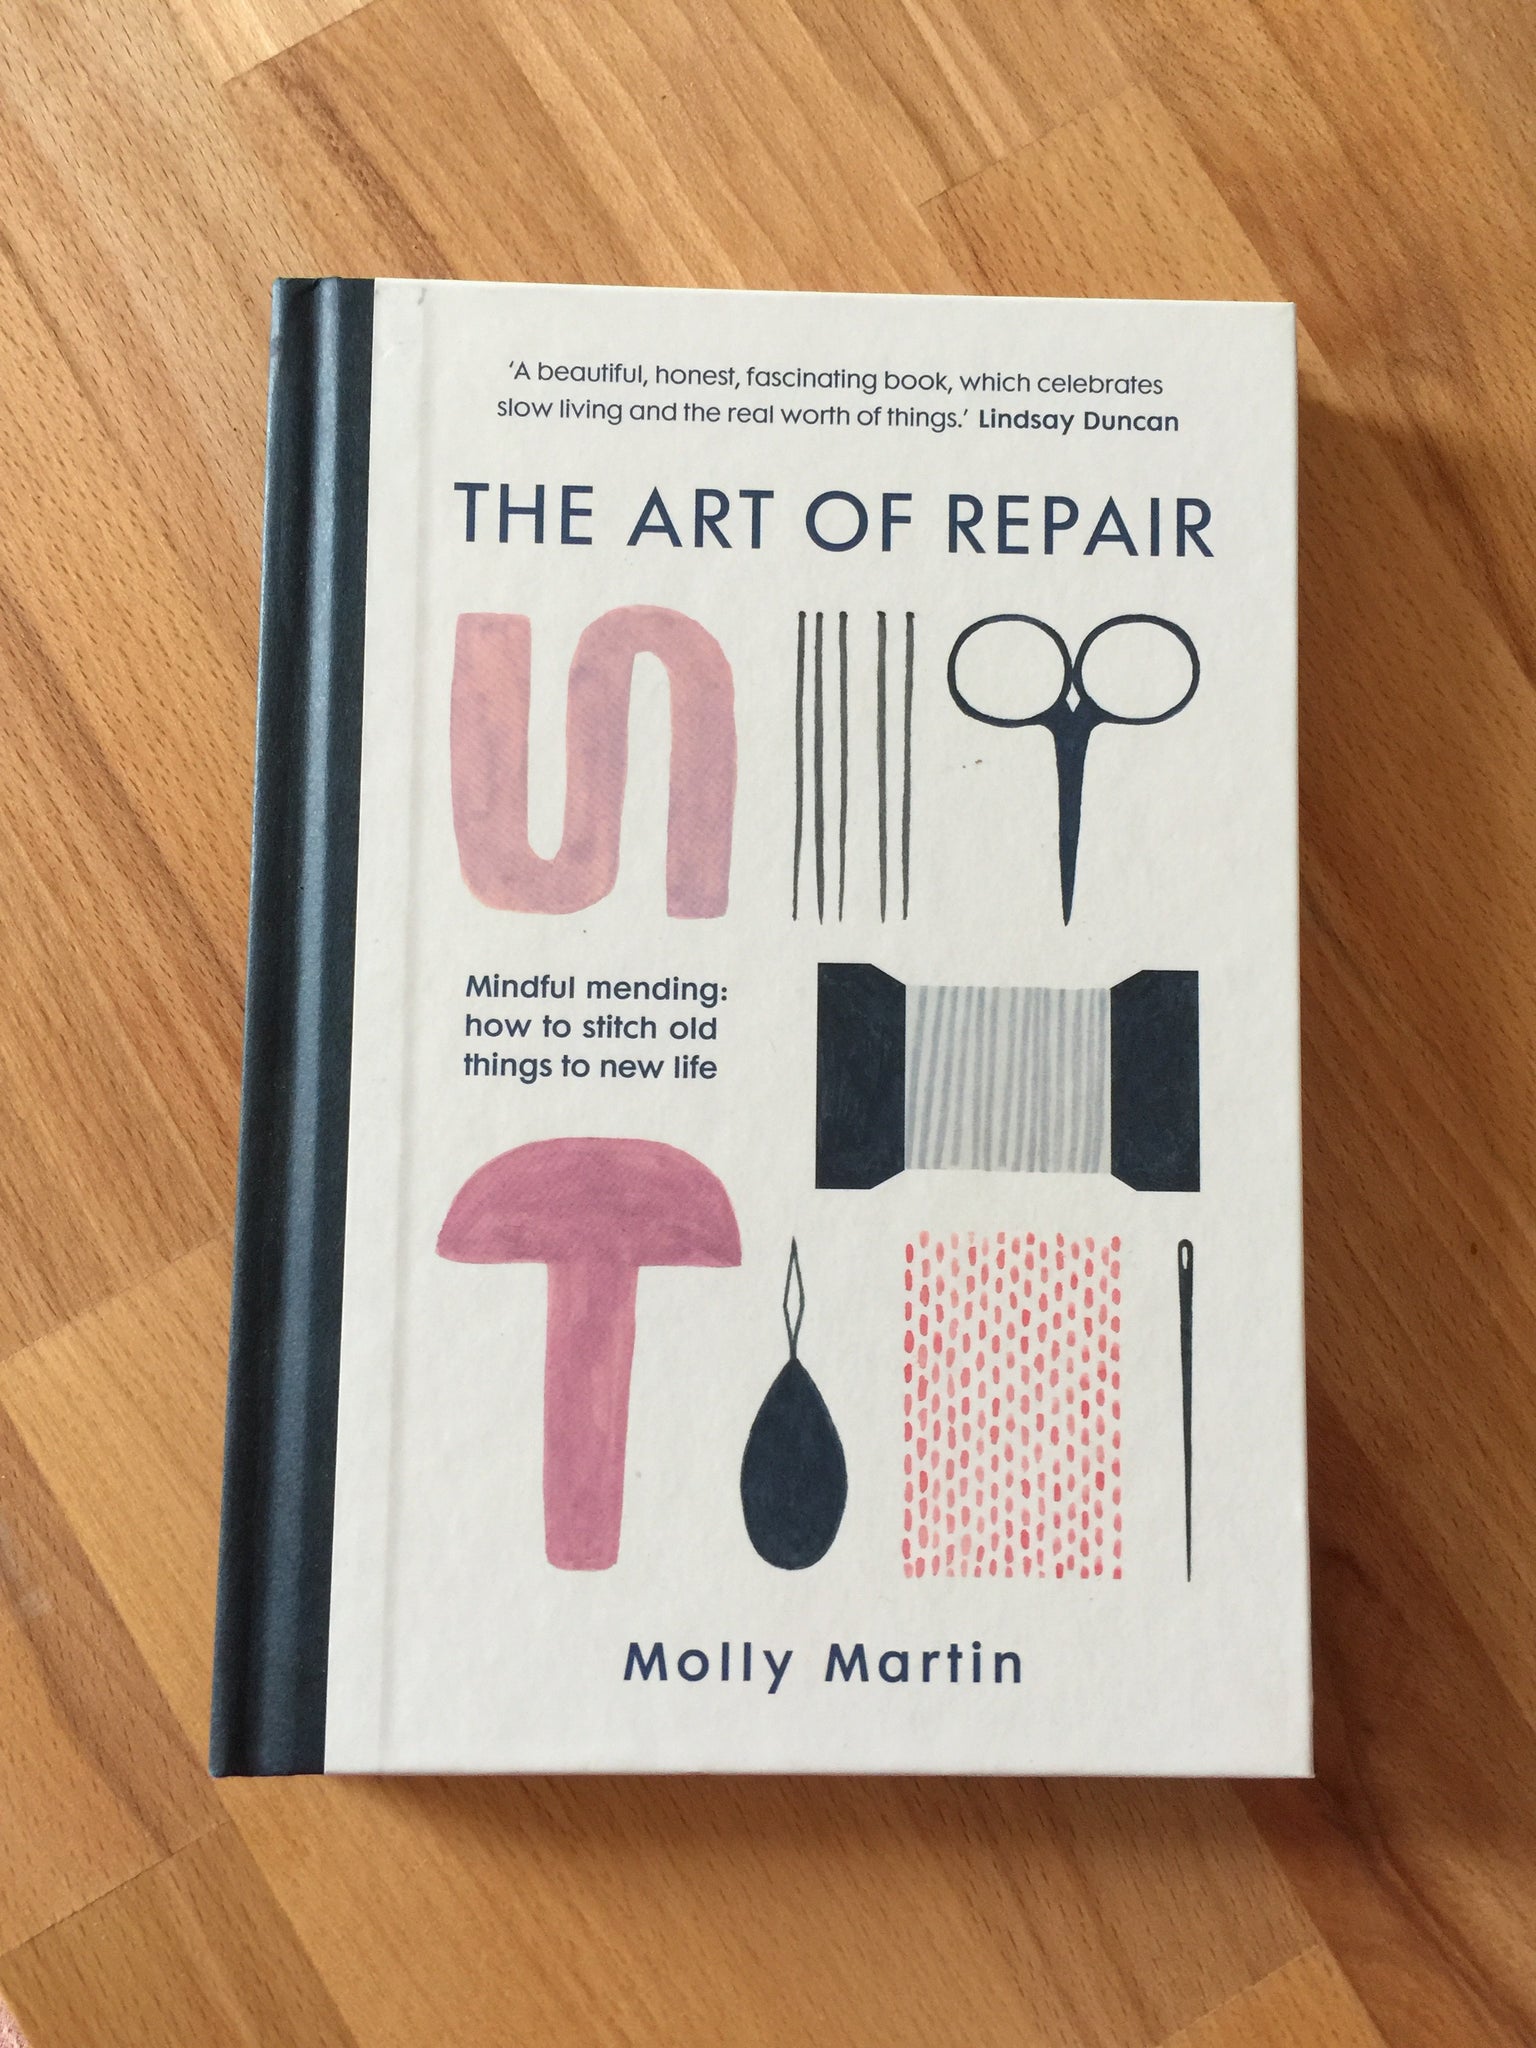 'The Art of Repair' by Molly Martin